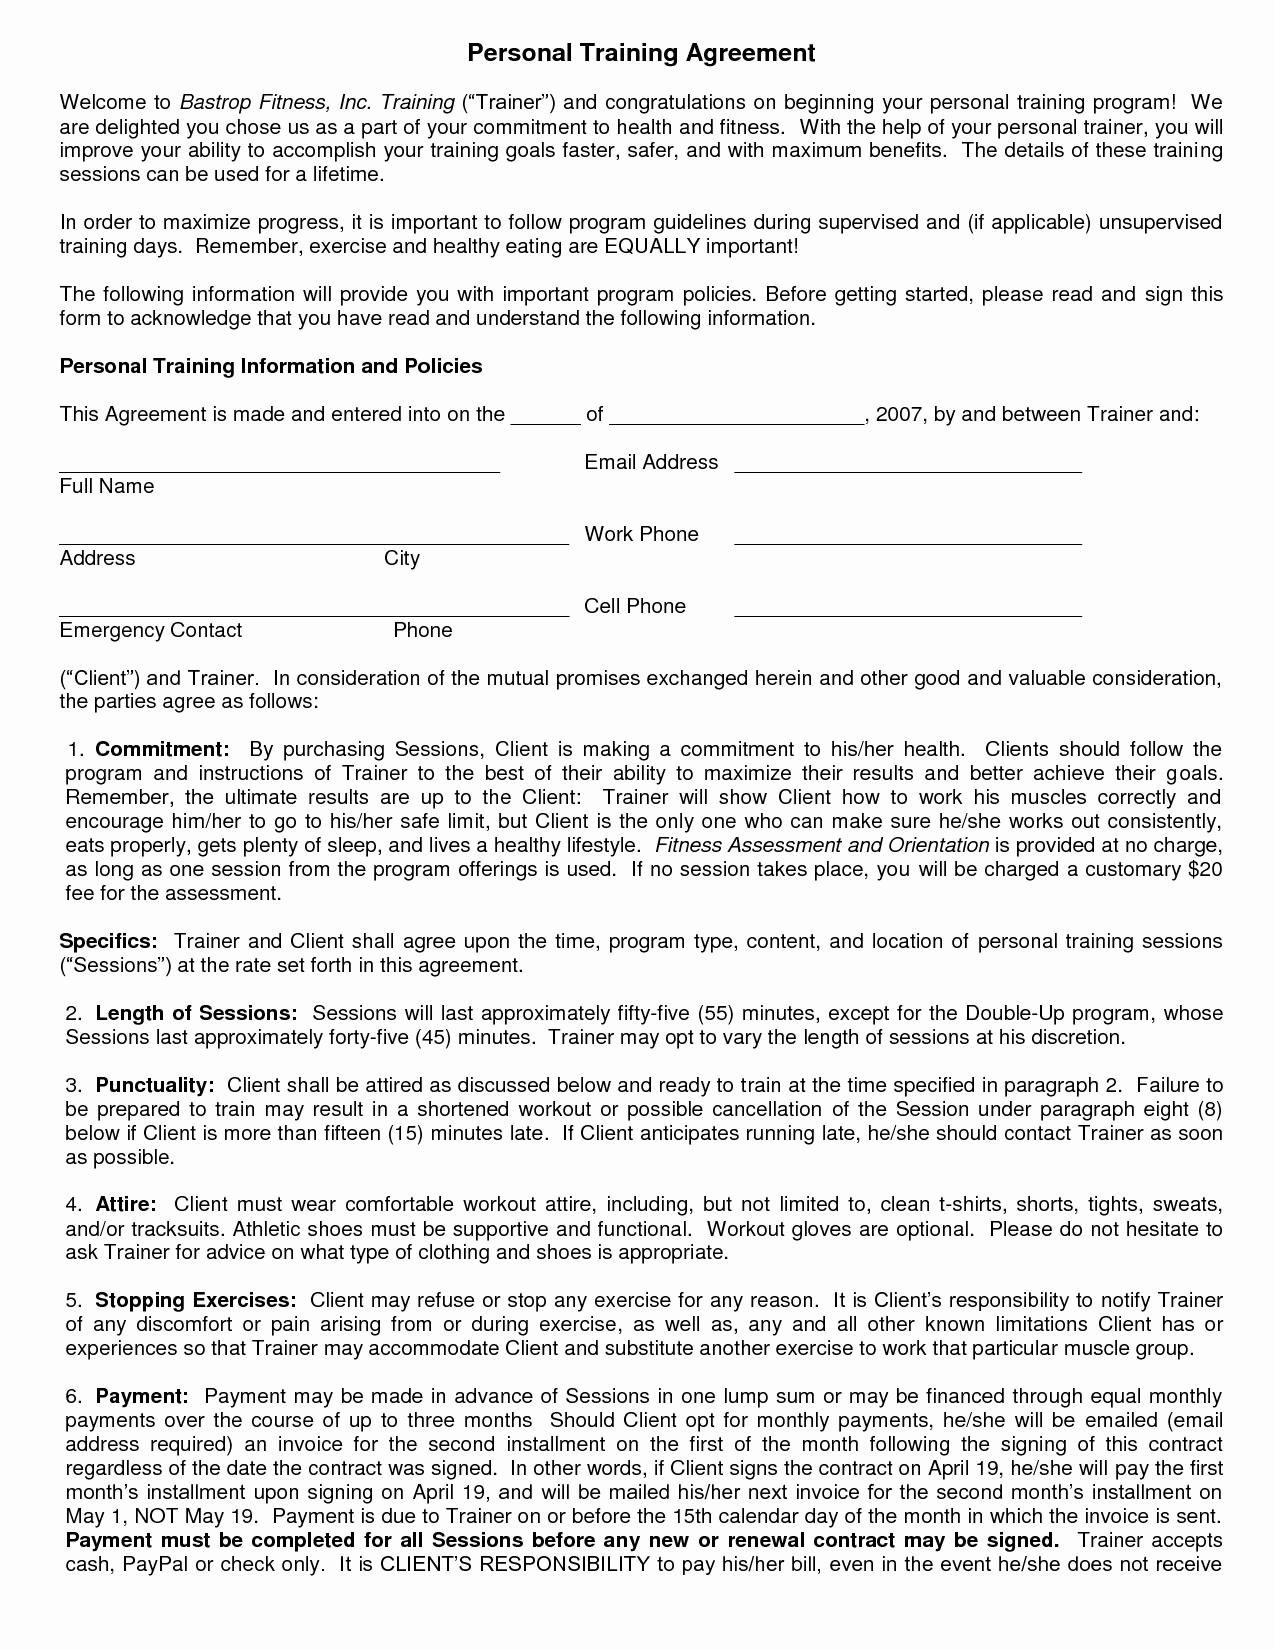 Personal Training Contract Template Elegant 10 Best Of Personal Contract Agreement Sample